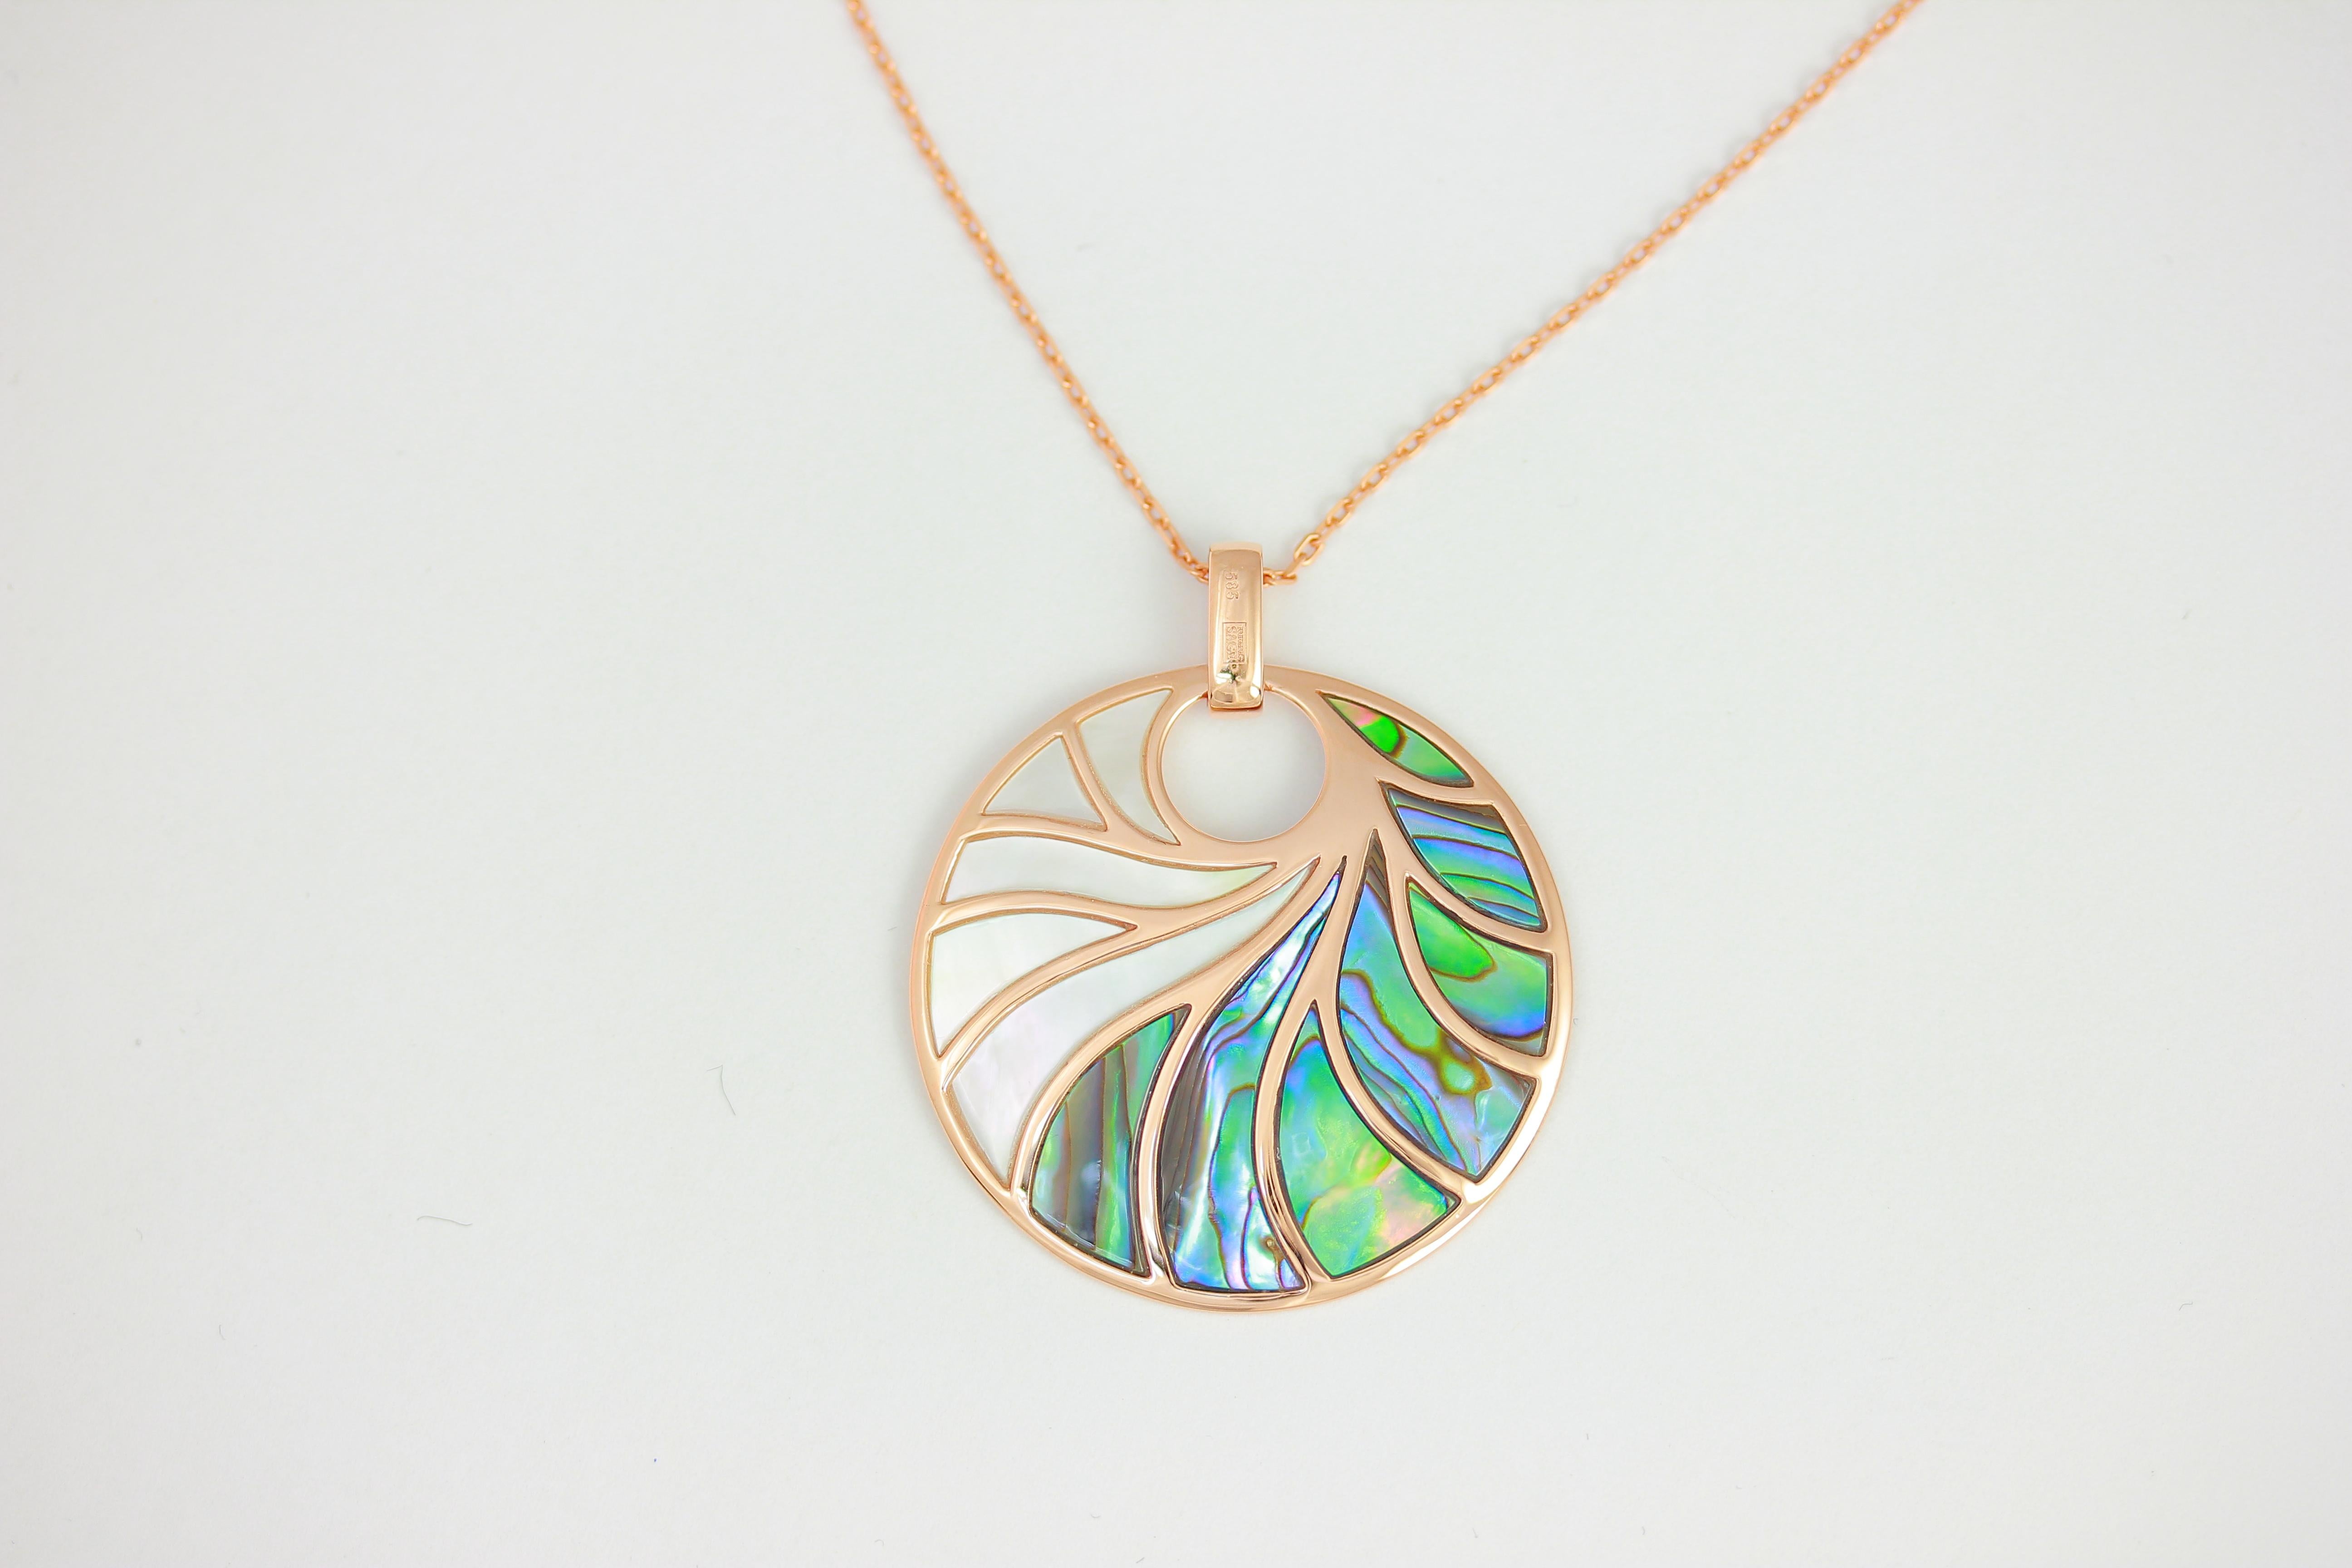 14K PG LARGE ROUND ABALONE AND WHITE MOP WITH DIAMOND BALE VENUS II PENDANT WITH CHAIN, 28 DIA 0.07 Carats